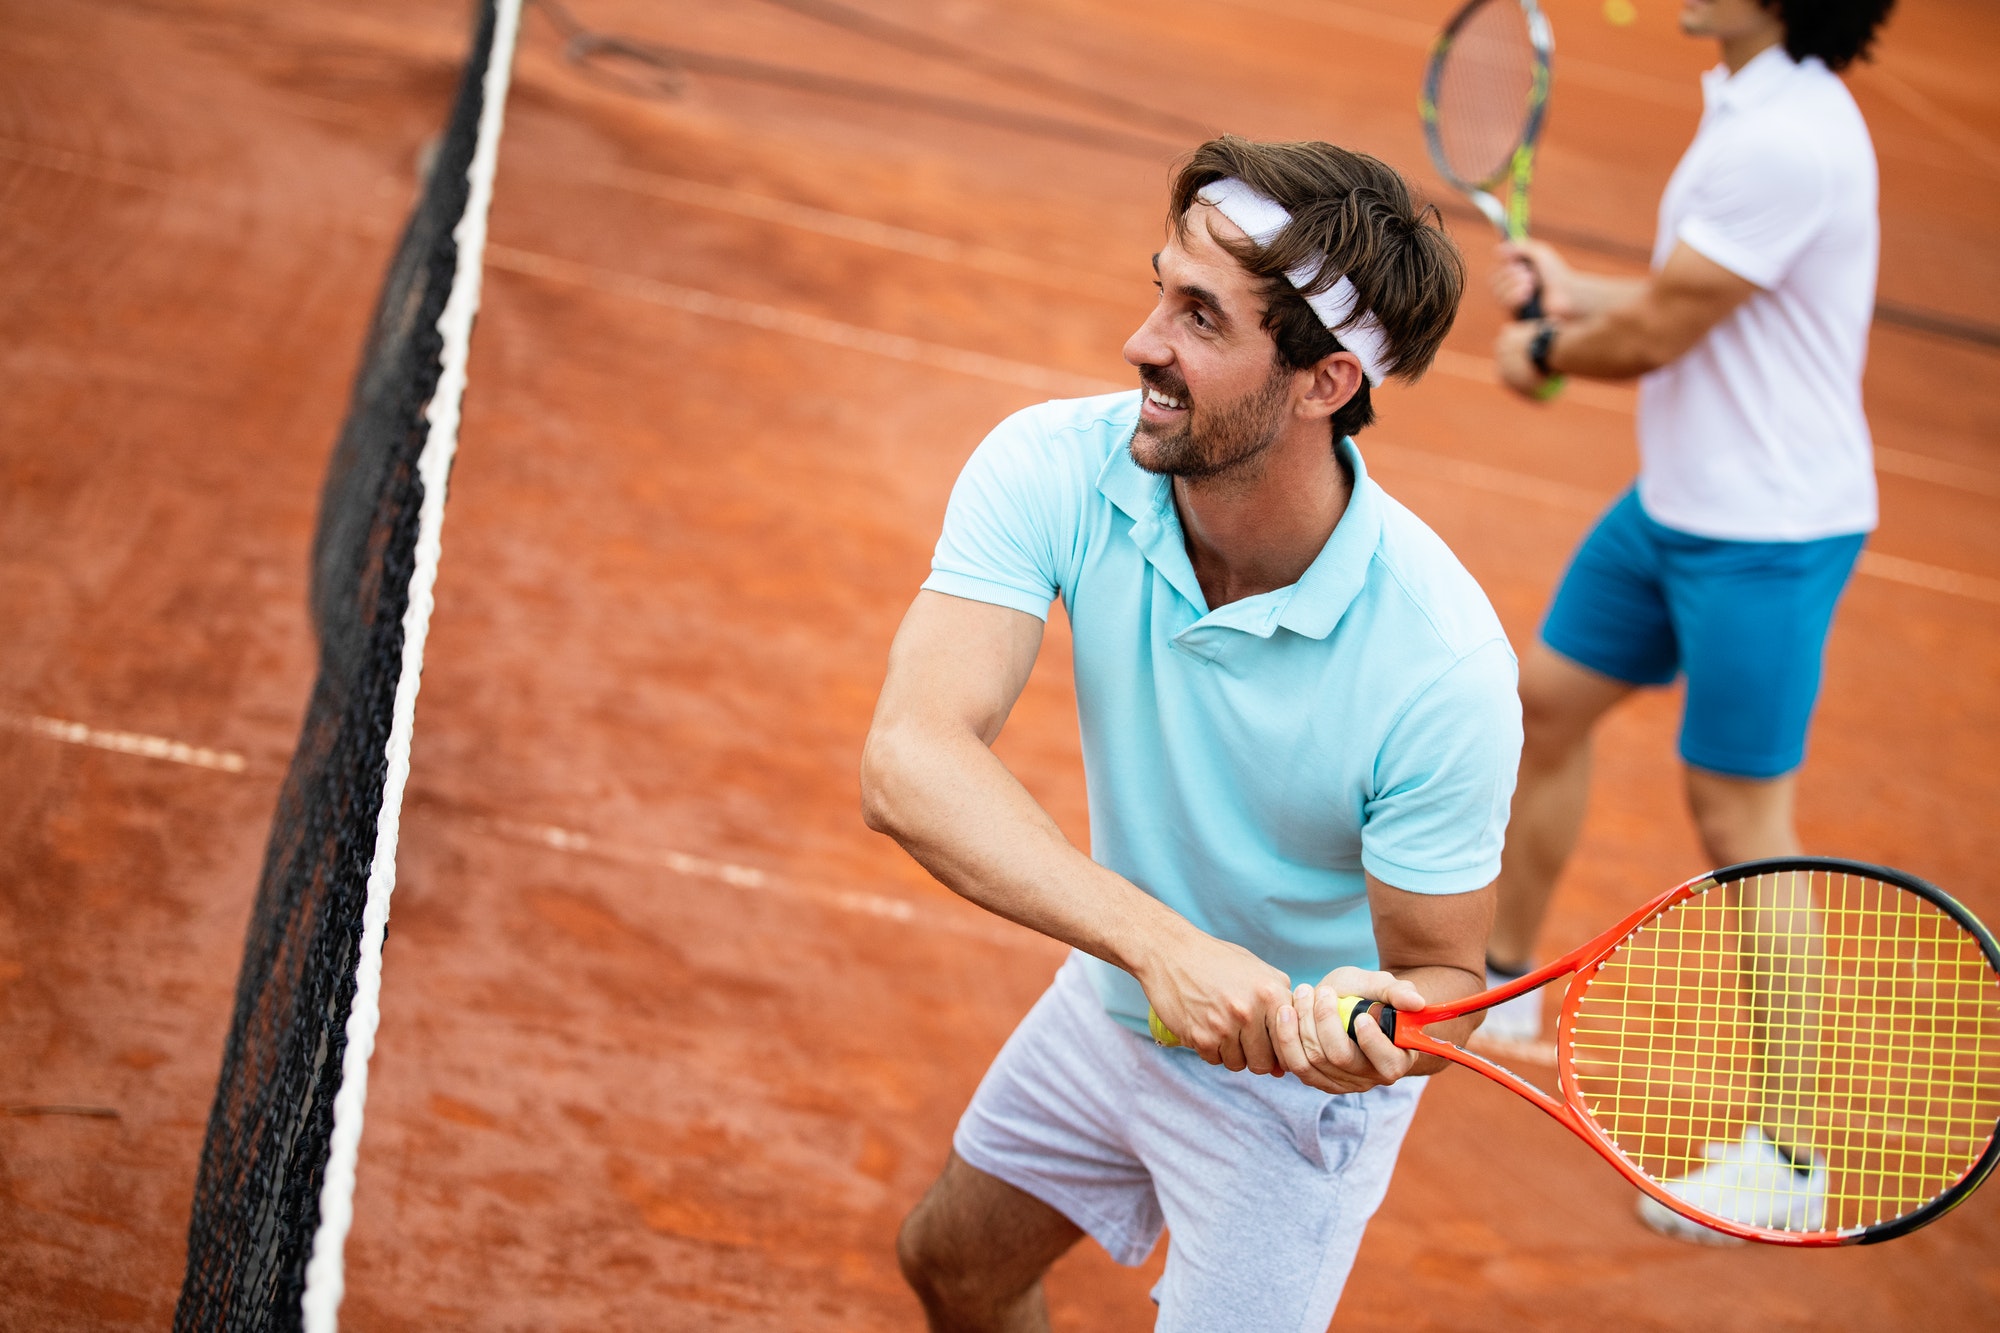 Why Playing Tennis Is a Great Way to Exercise